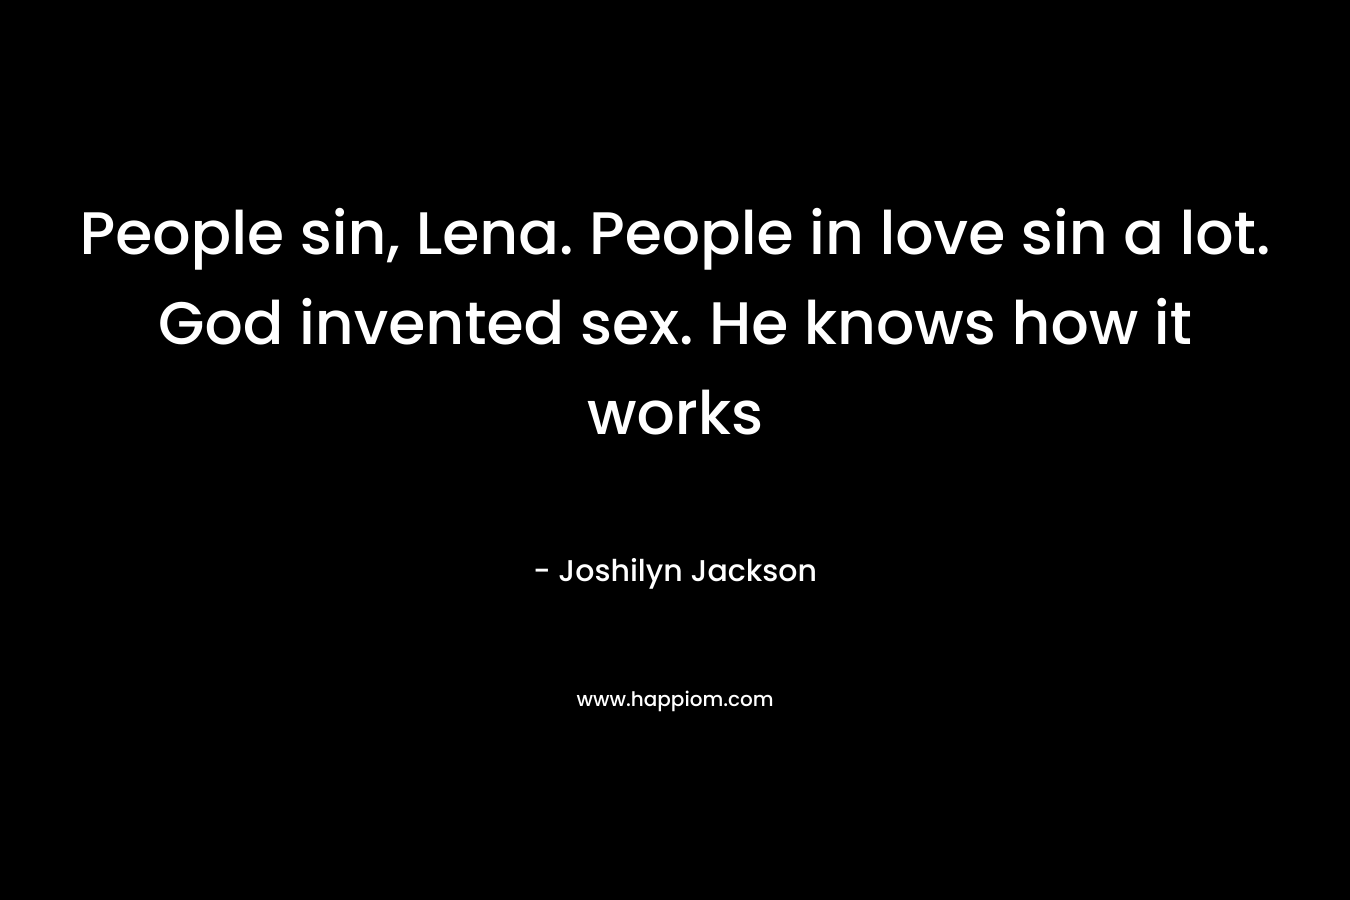 People sin, Lena. People in love sin a lot. God invented sex. He knows how it works